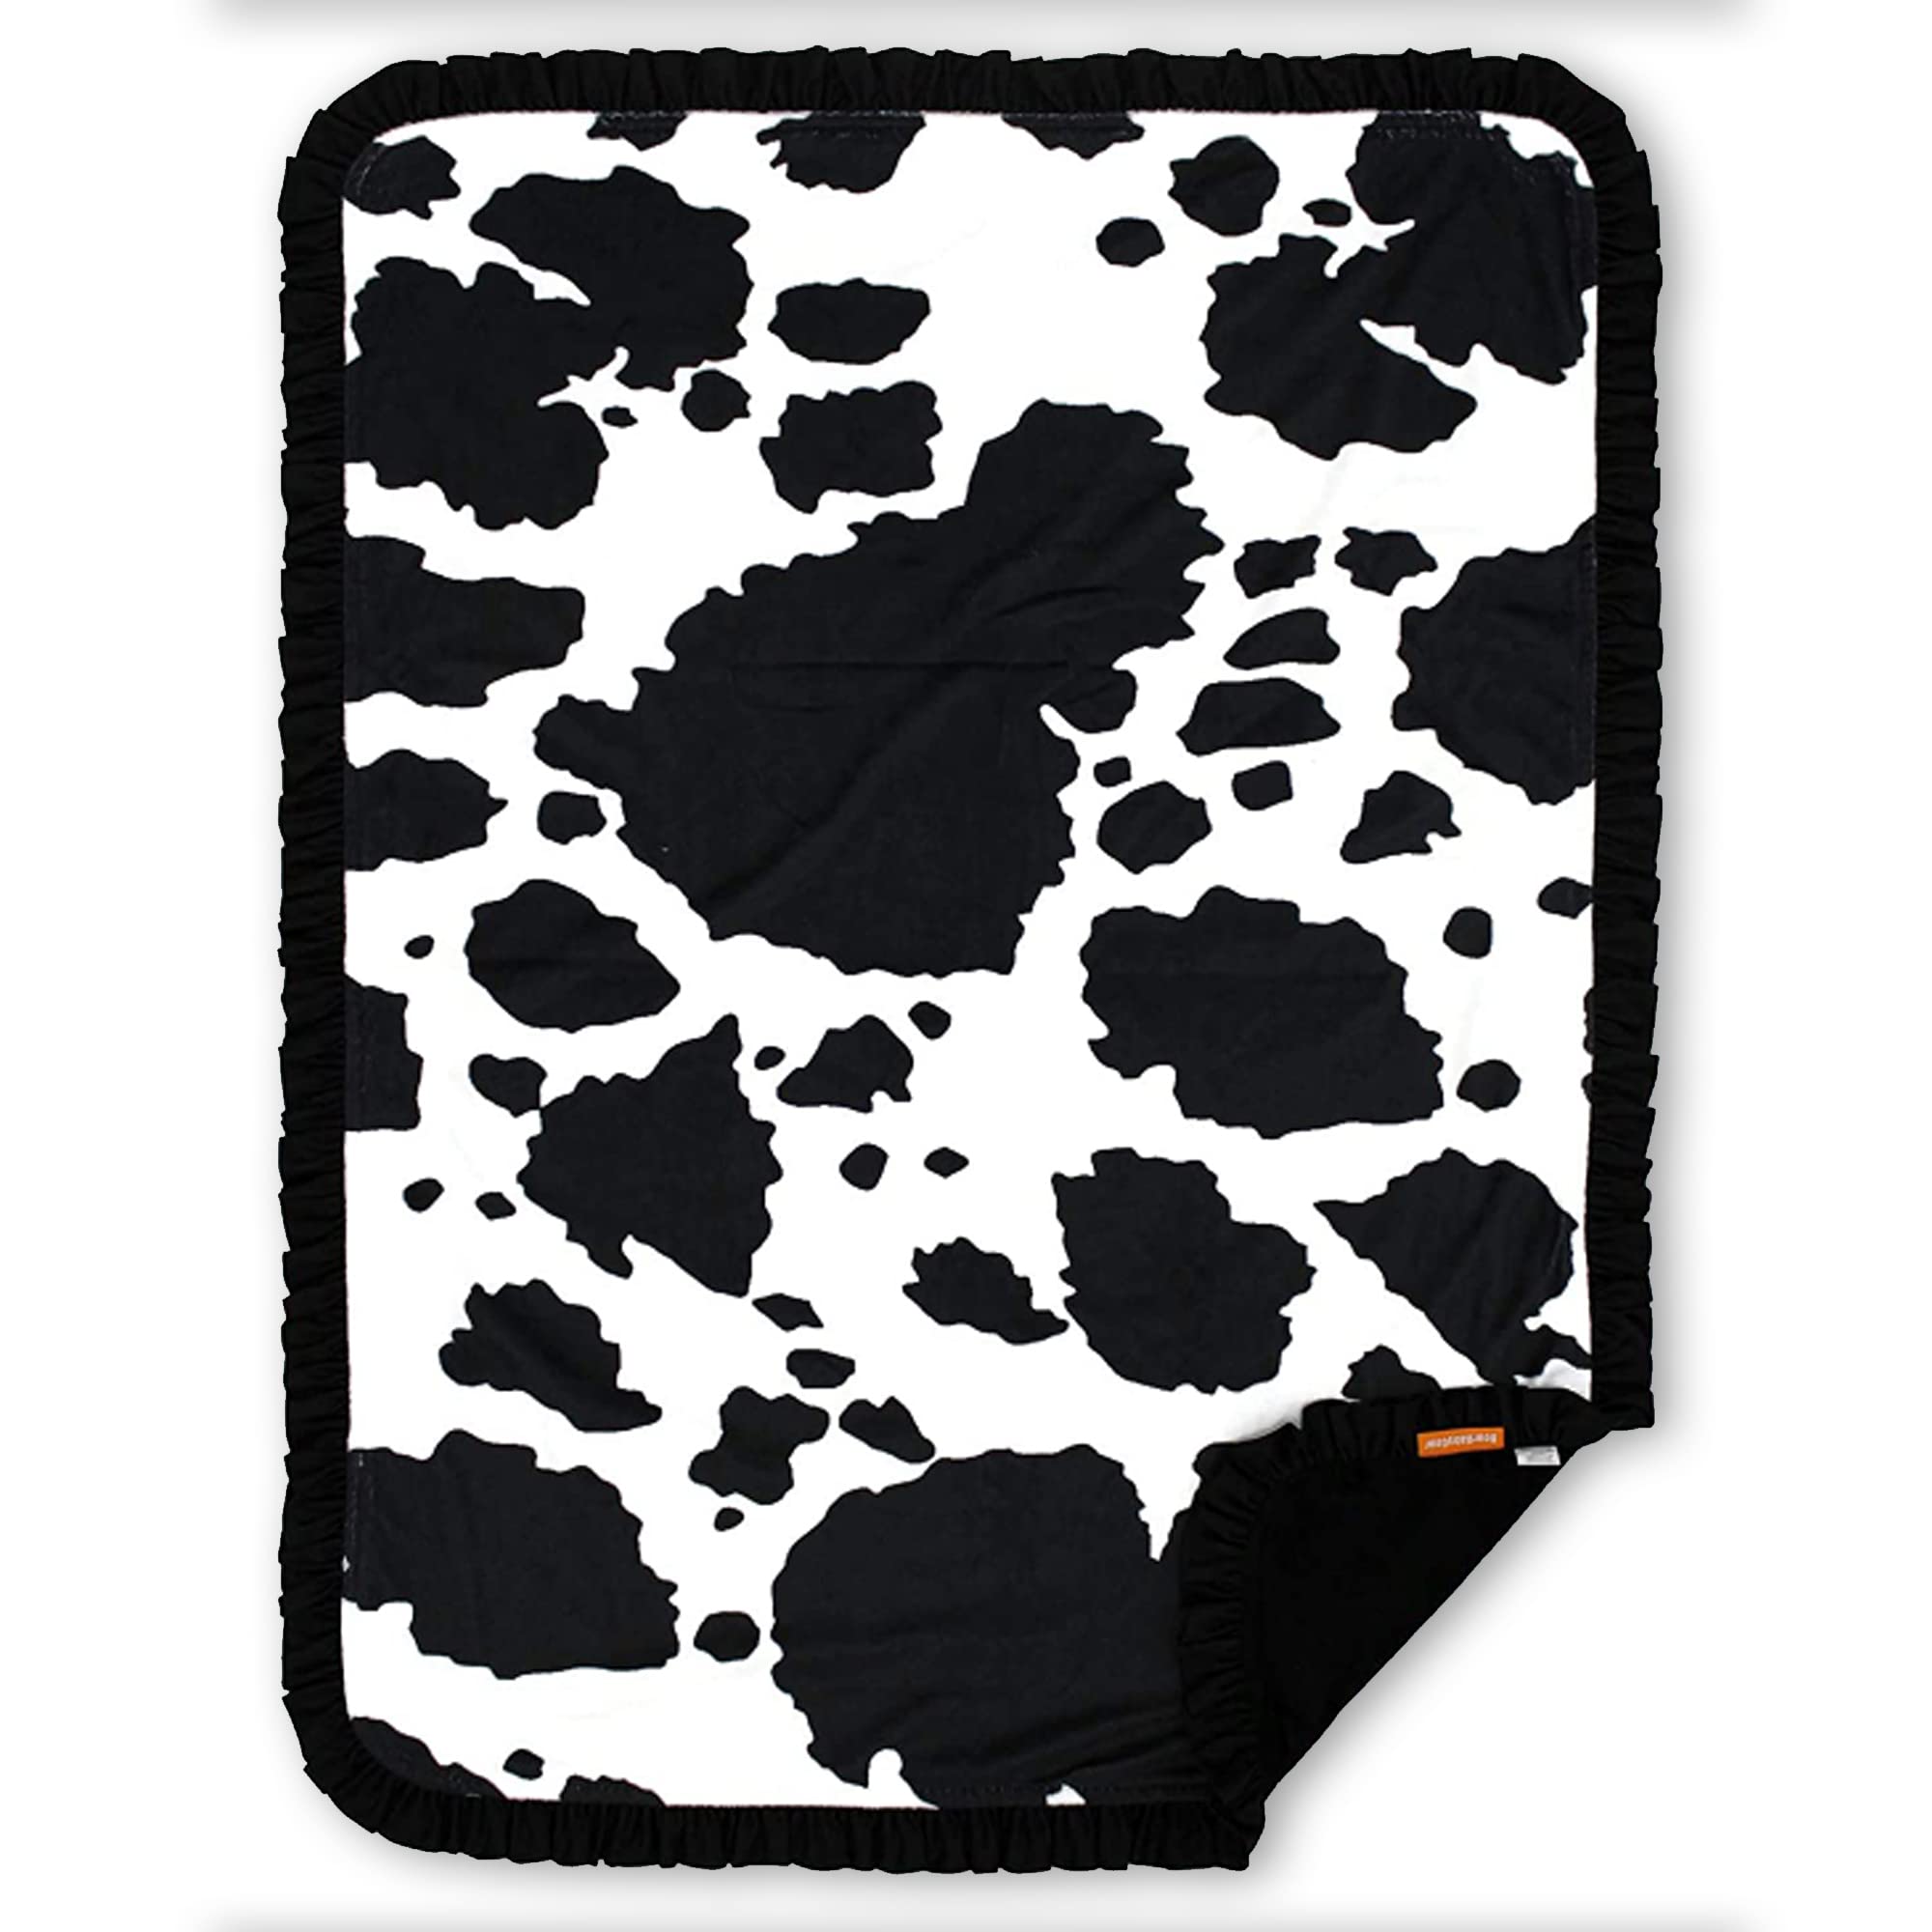 Dear Baby gear Black and White cow Print Minky Baby Blanket with Ruffle - Double Layer Soft Baby Blanket That Keeps Babies Warm